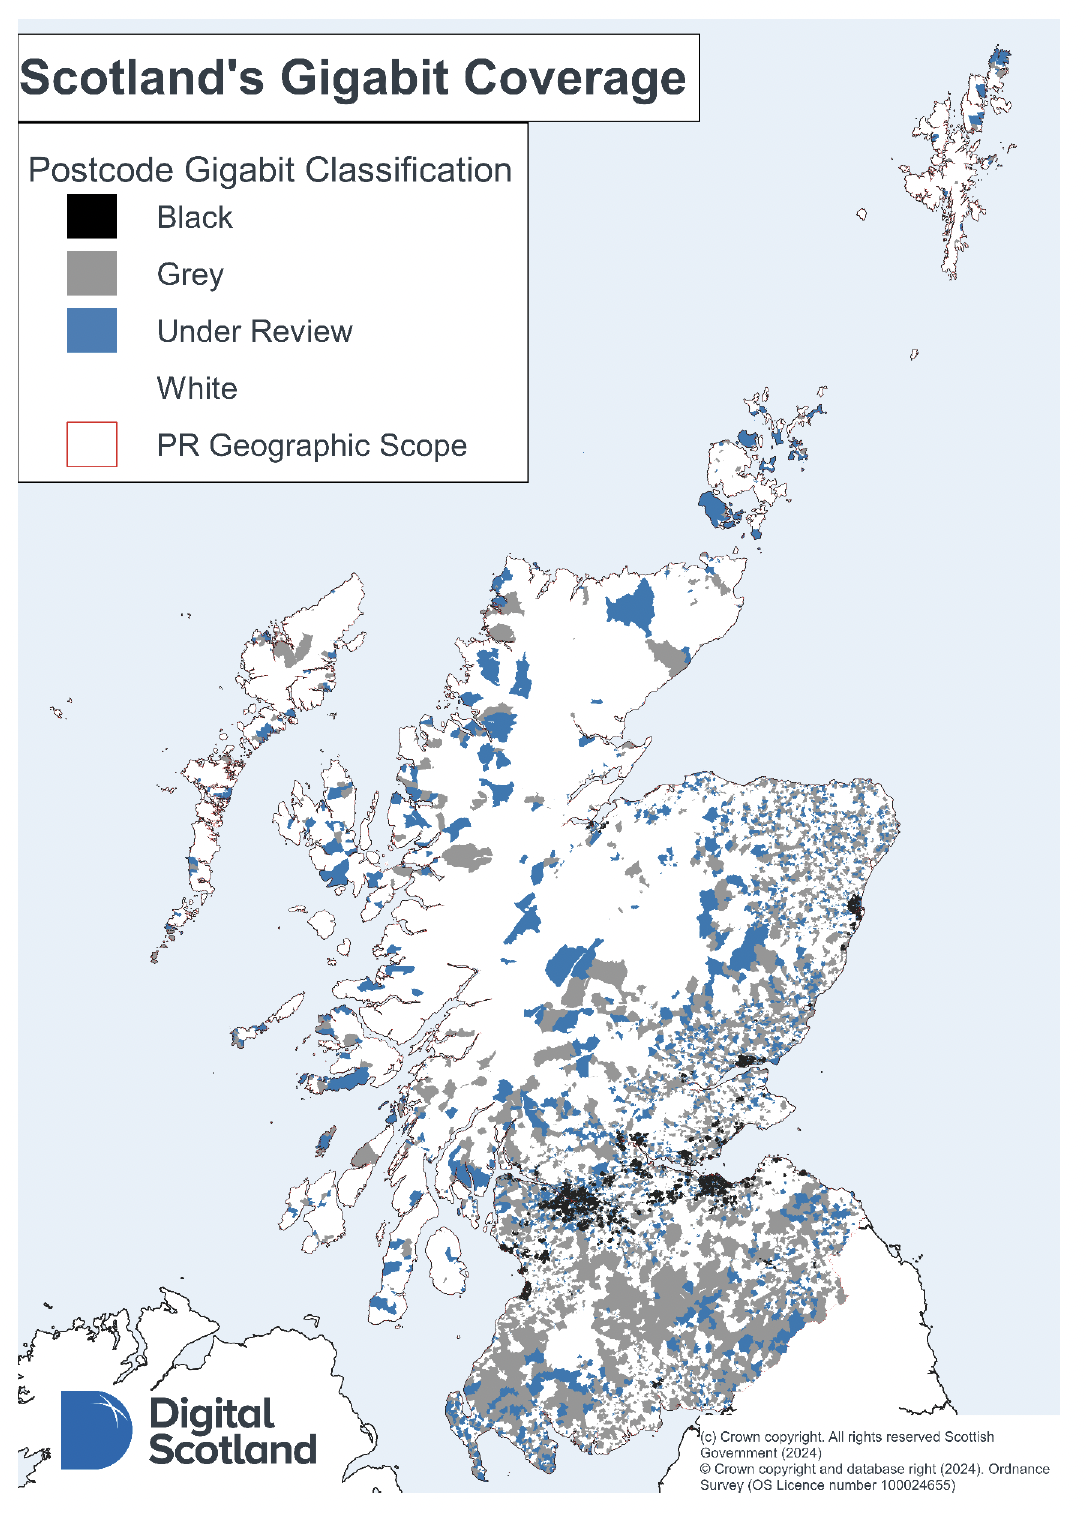 A map of Scotland showing gigabit classifications at postcode level.